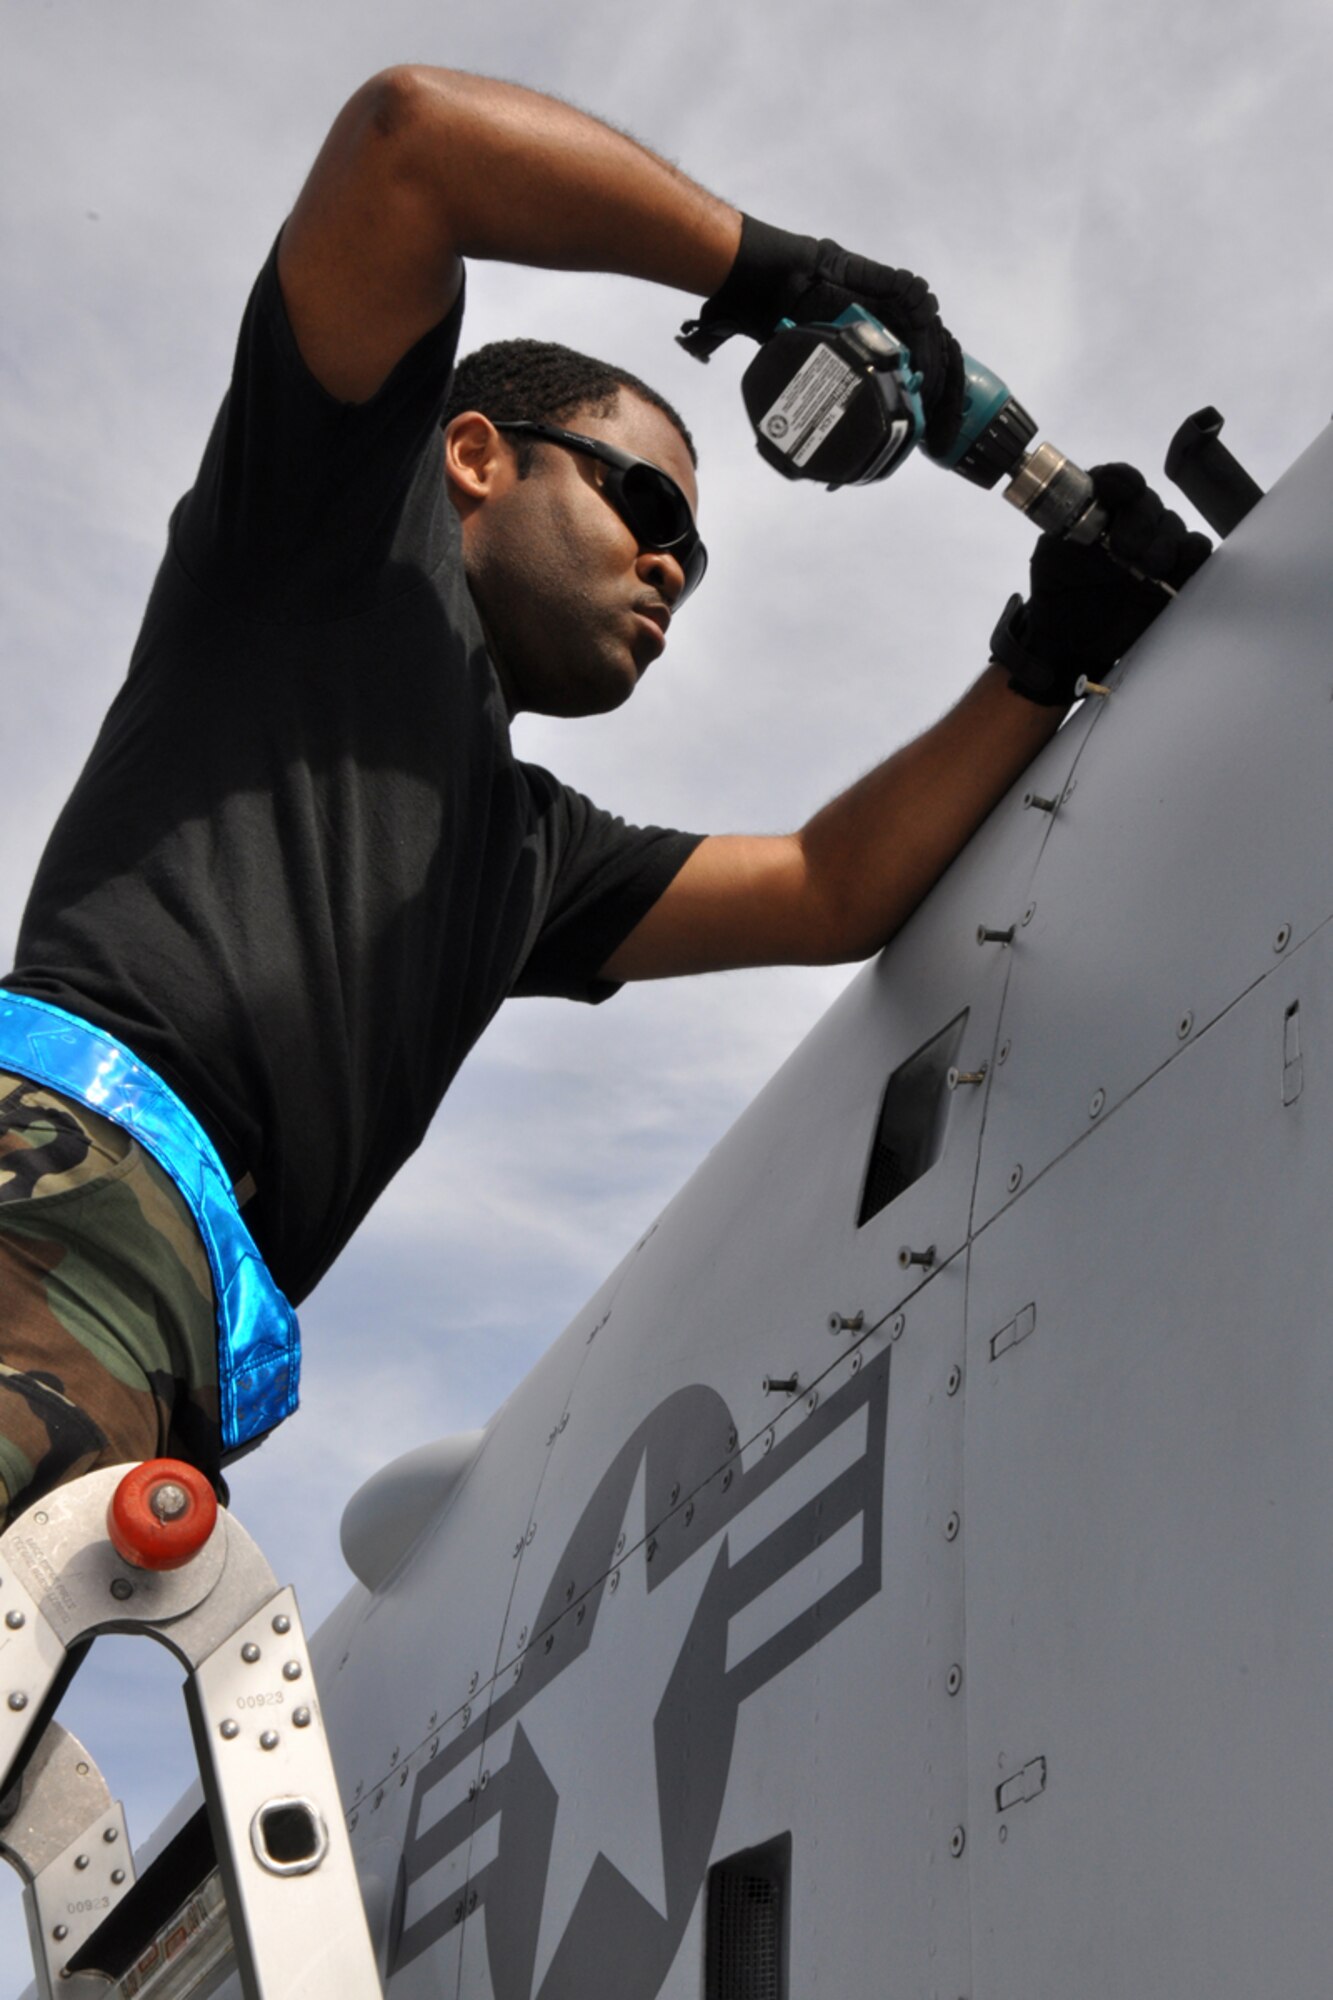 Staff Sgt. Davarick Pickens, avionics specialist, 717th Aircraft Maintenance Squadron, Barksdale Air Force Base, La., opens a panel to perform a maintenance check on an A-10 Thunderbolt March 30, 2009. Airmen from the 717th AMXS maintained A-10 jets from the 47th Fighter Squadron at Barksdale AFB, while they supported training evolutions for Joint Terminal Attack Controllers with the 15th Air Support Operations Squadron at Fort Stewart, Ga. (US Air Force photo/Tech. Sgt. Jeff Walston)